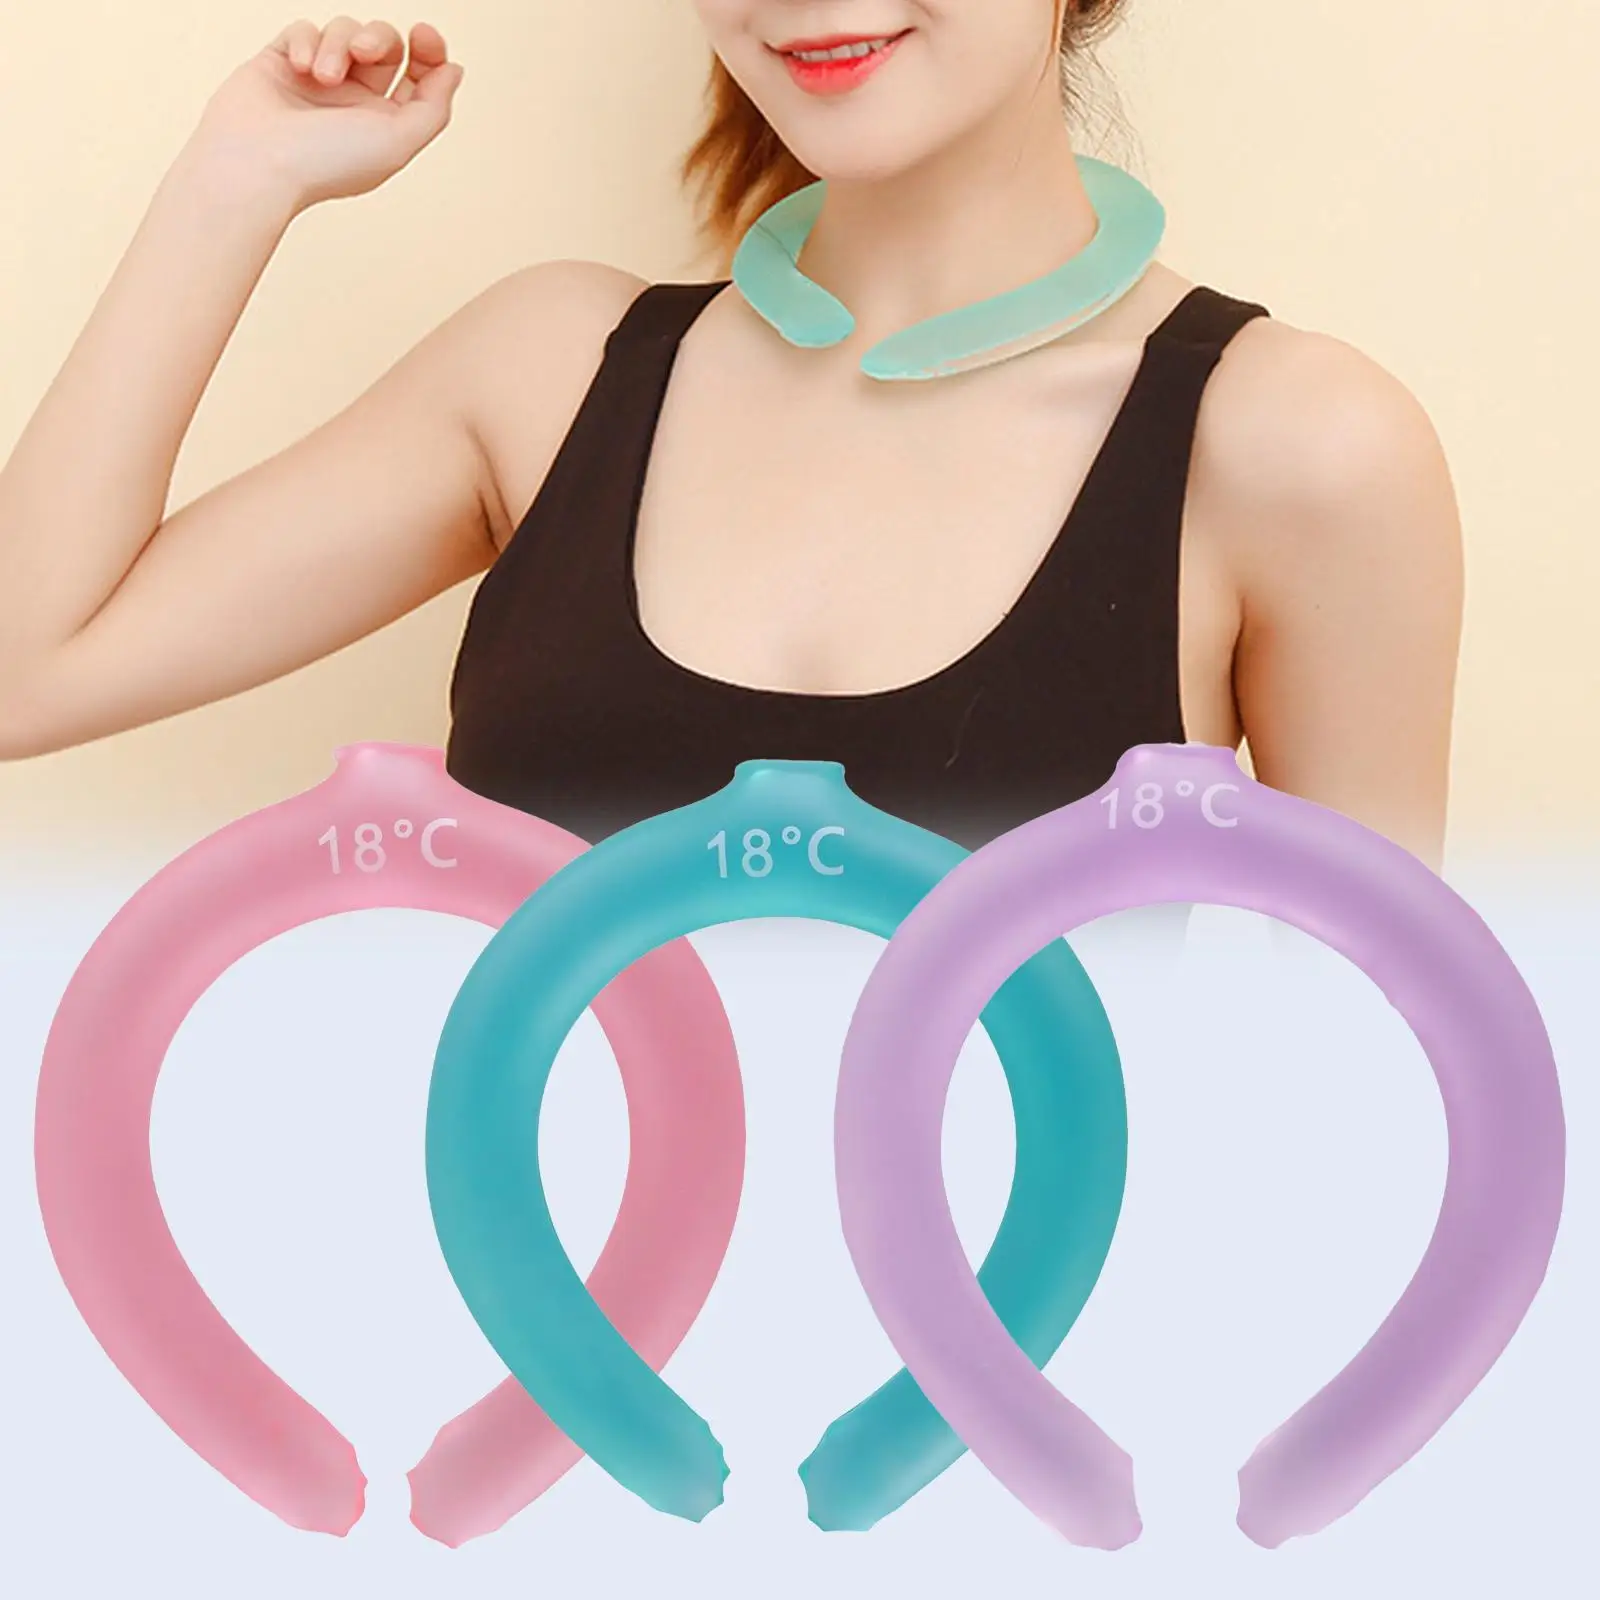 

Summer Neck Cooler Tube Neck Cooler For Outdoor Sports Reusable Neck Cooling Wrap Gel Ice Pack Relief For Hot Flashes And Feve